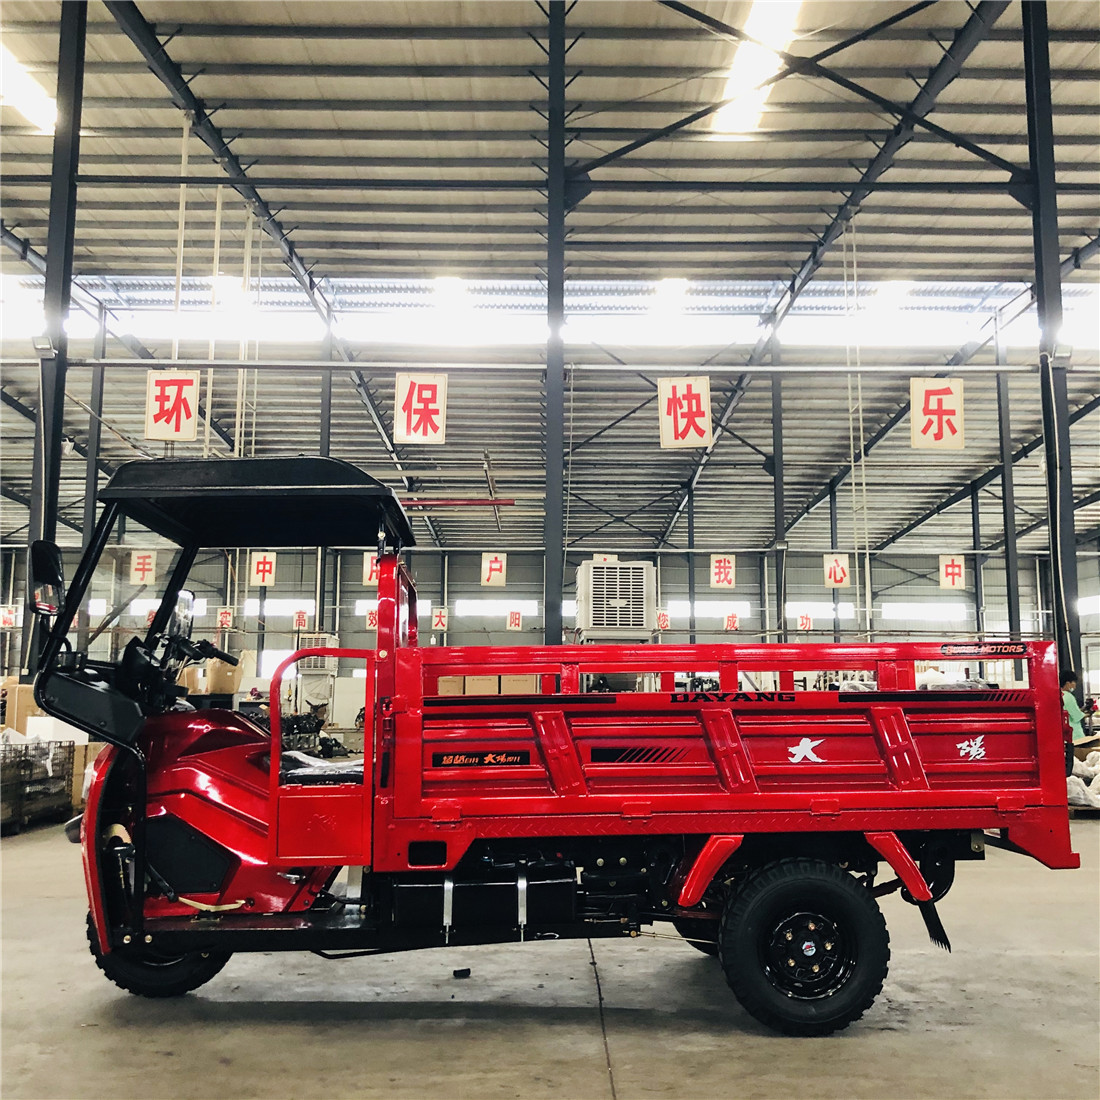 Hot selling DAYANG brand displacement 250CCheavy duty stable tire truck cargo tricycle for global market